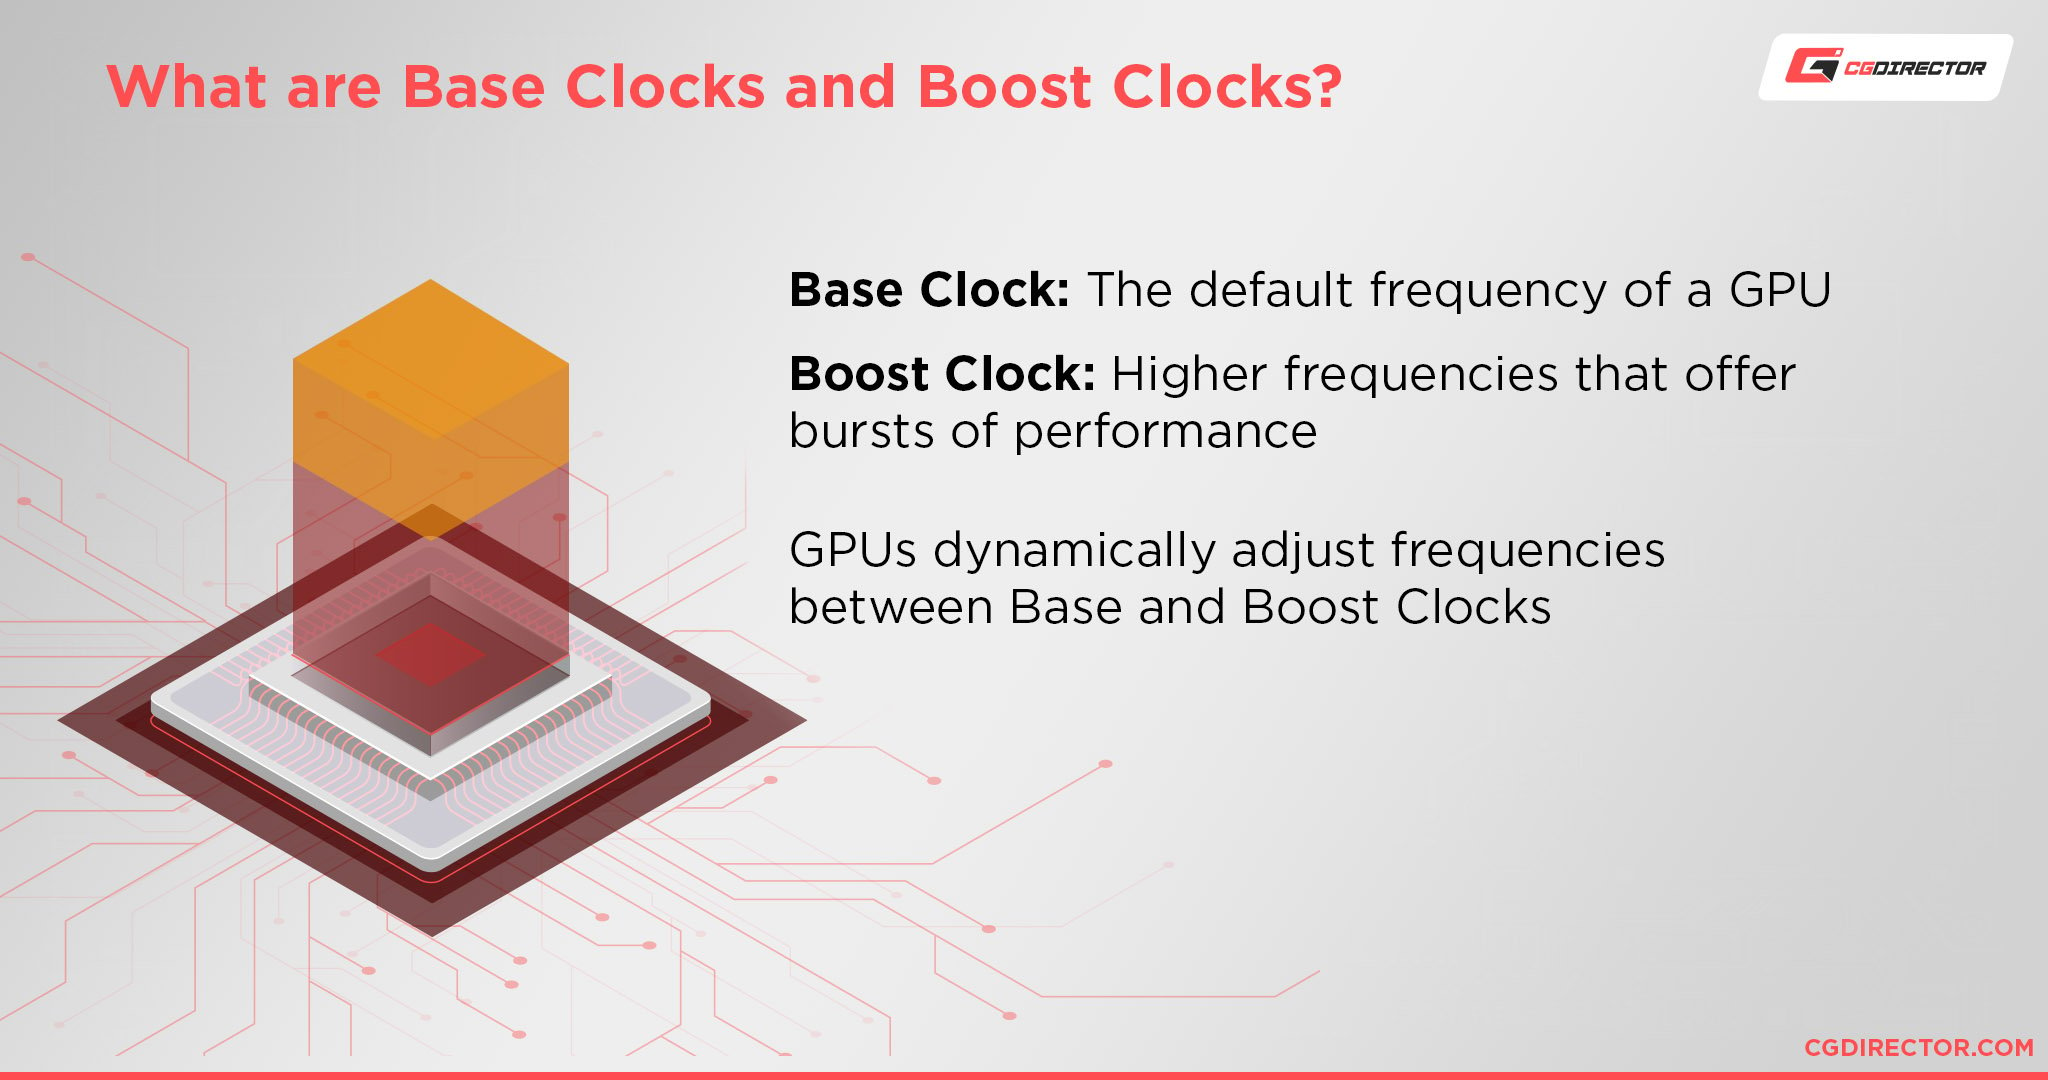 What are Base Clocks and Boost Clocks